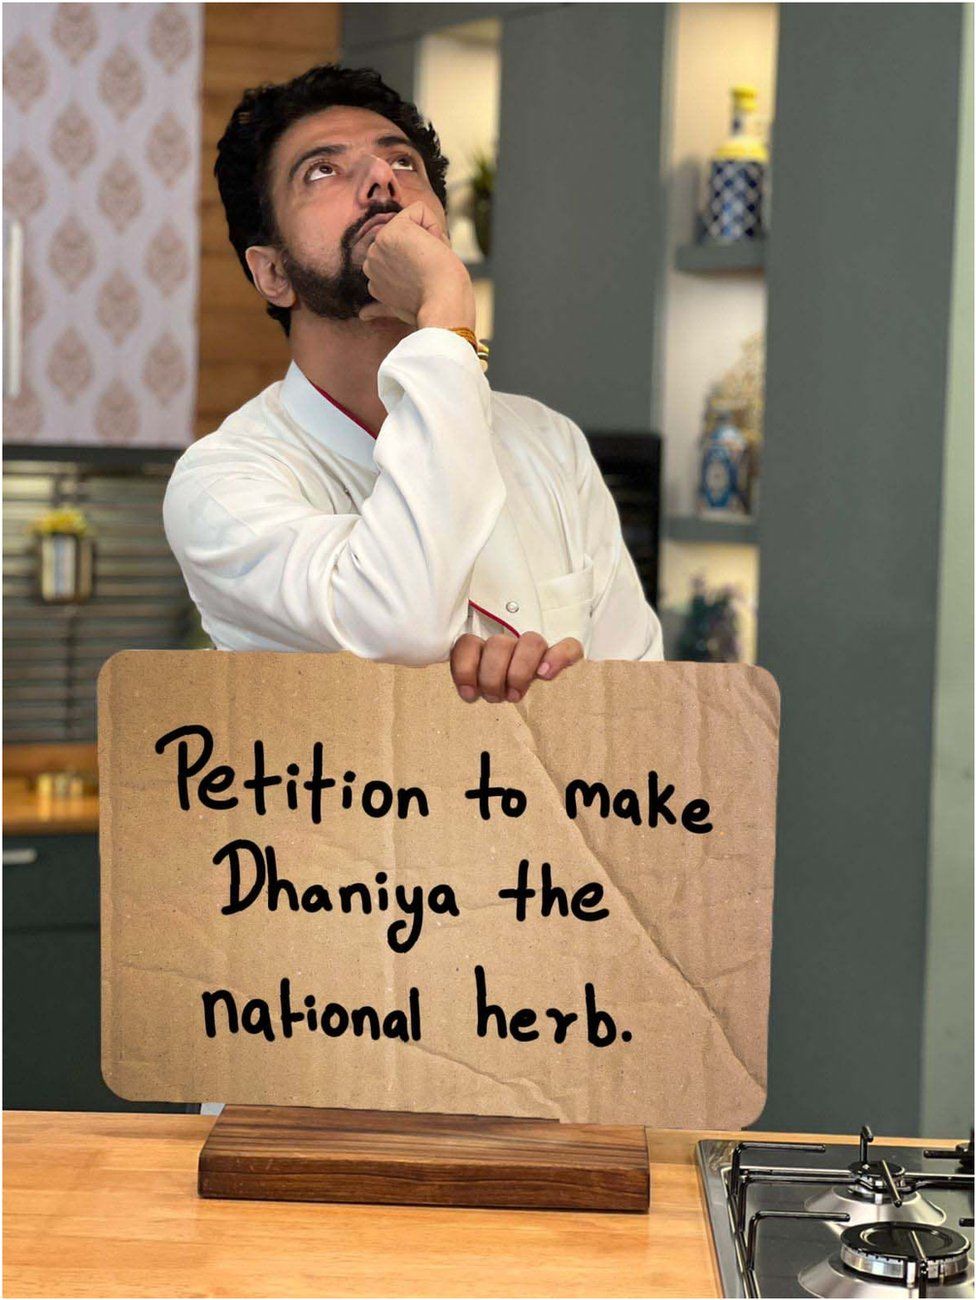 Chef Ranveer Brar with his petition